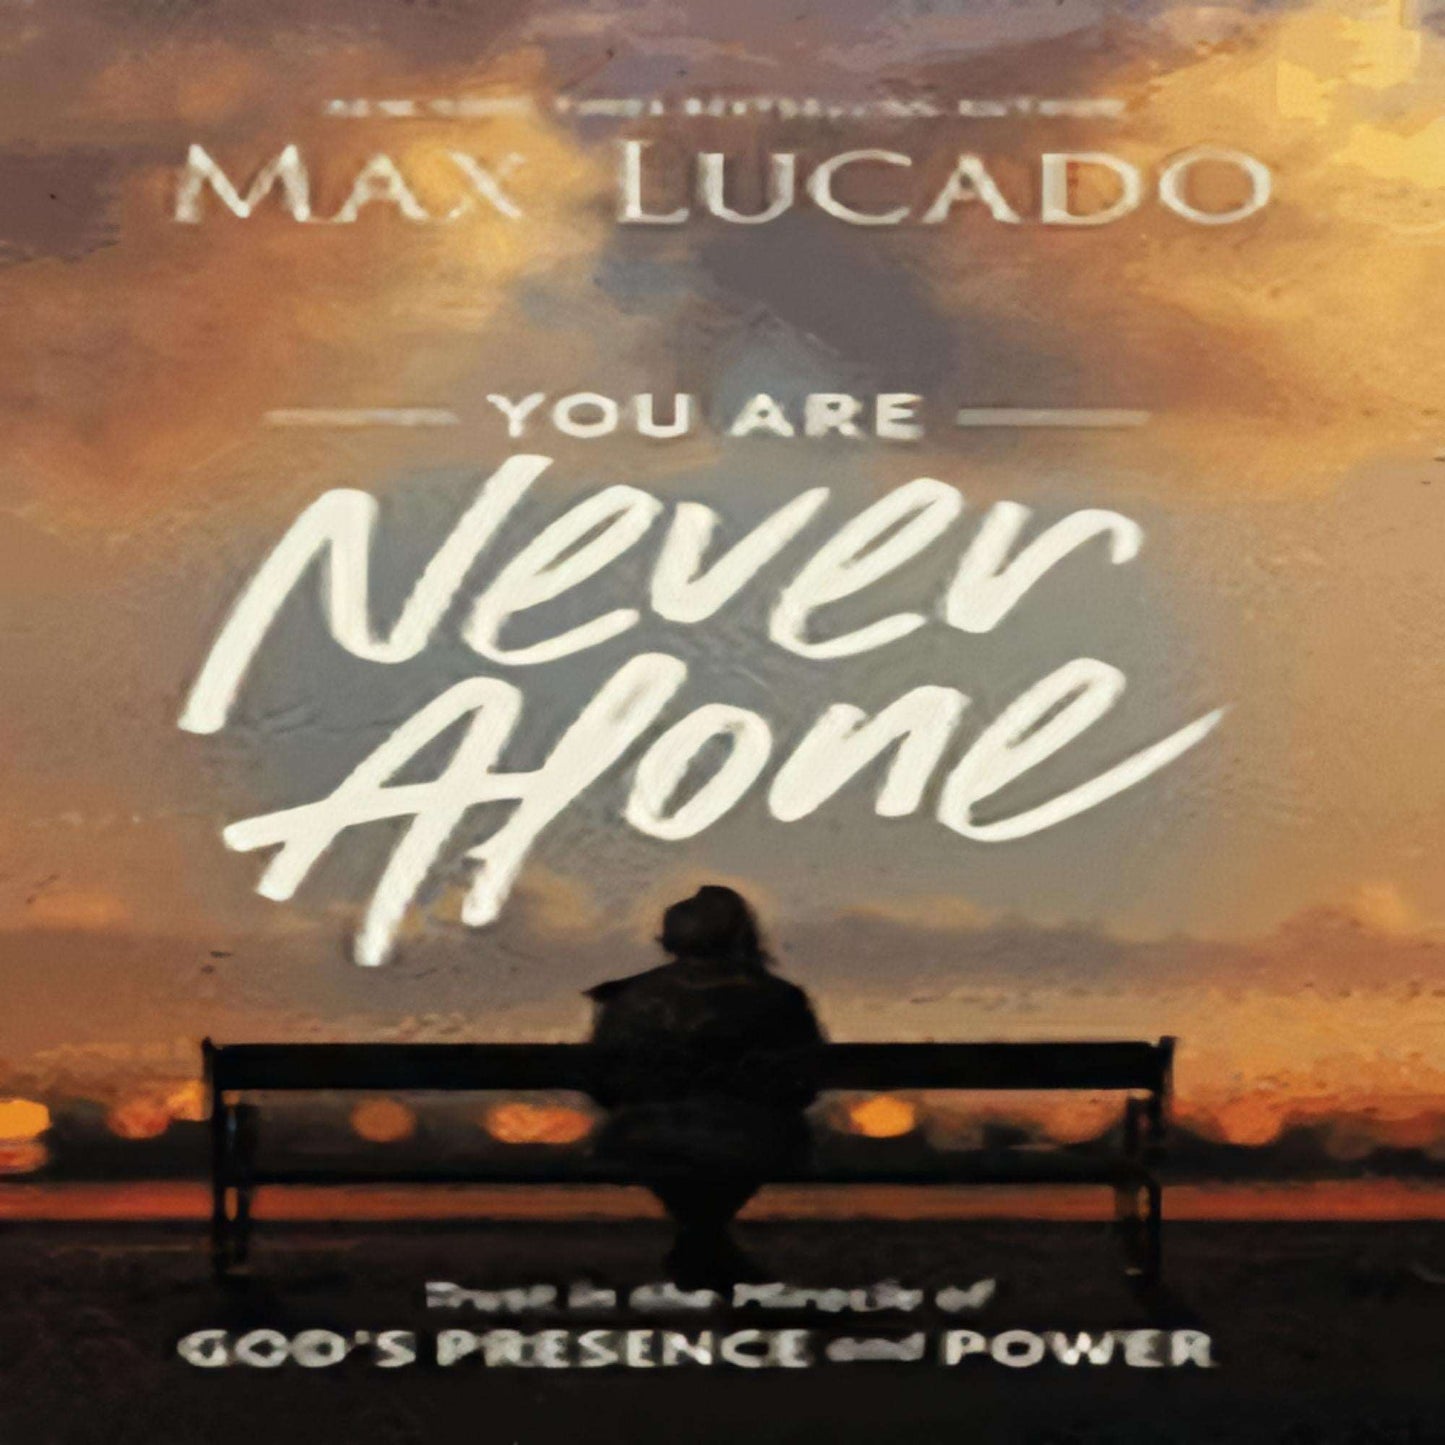 You Are Never Alone: Trust in the Miracle of God's Presence and Power76-021423-1400217342DPGBOOKSTORE.COM. Today's Bestsellers.